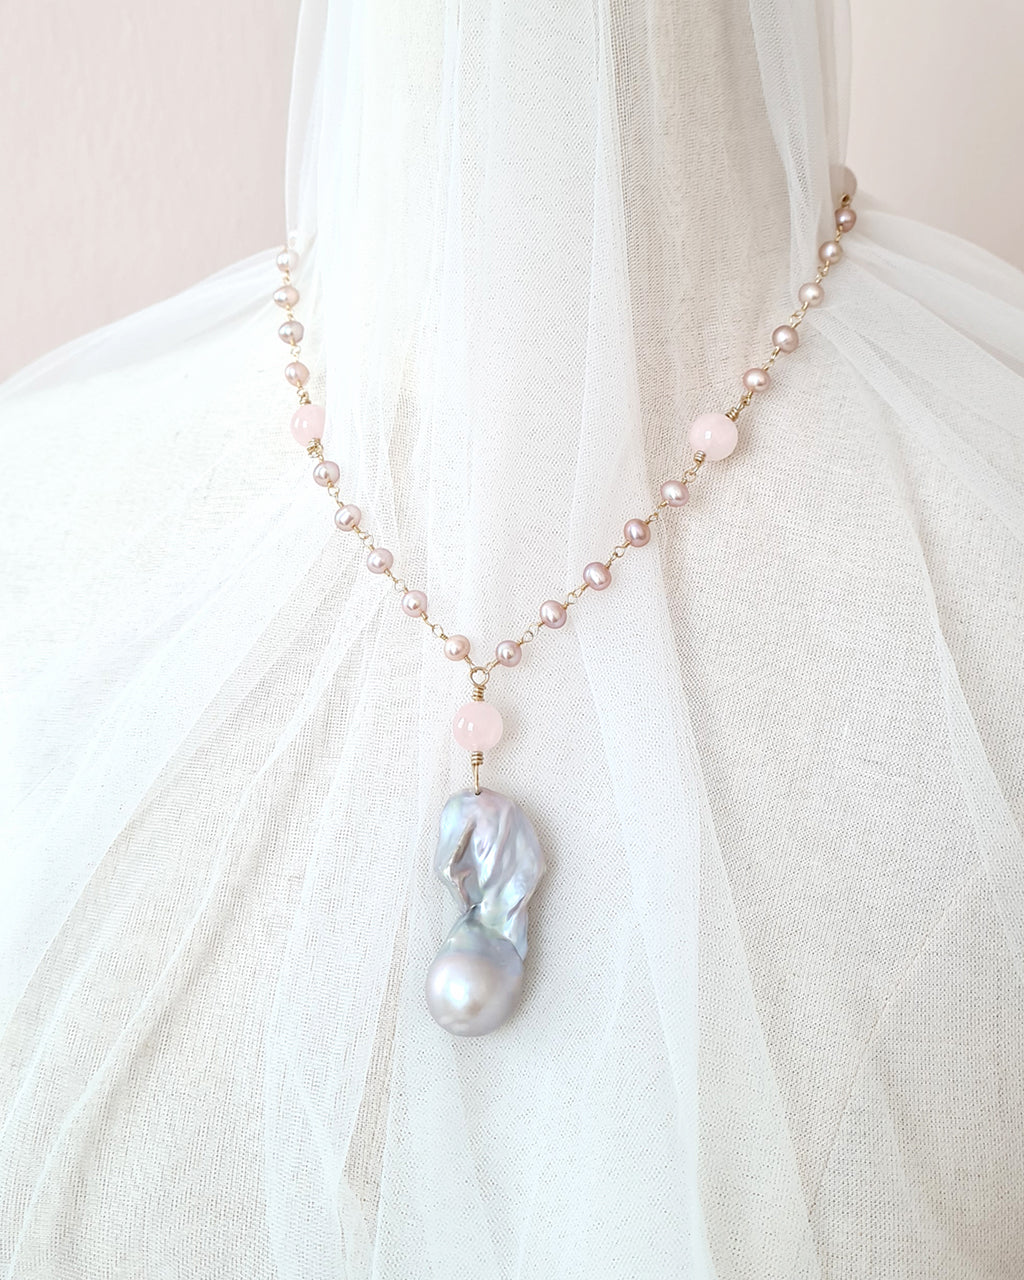 Grey Baroque Pearl and Rose Quartz Necklace - Wedding Bridal Jewelry for Brides and Bridesmaids | Singapore